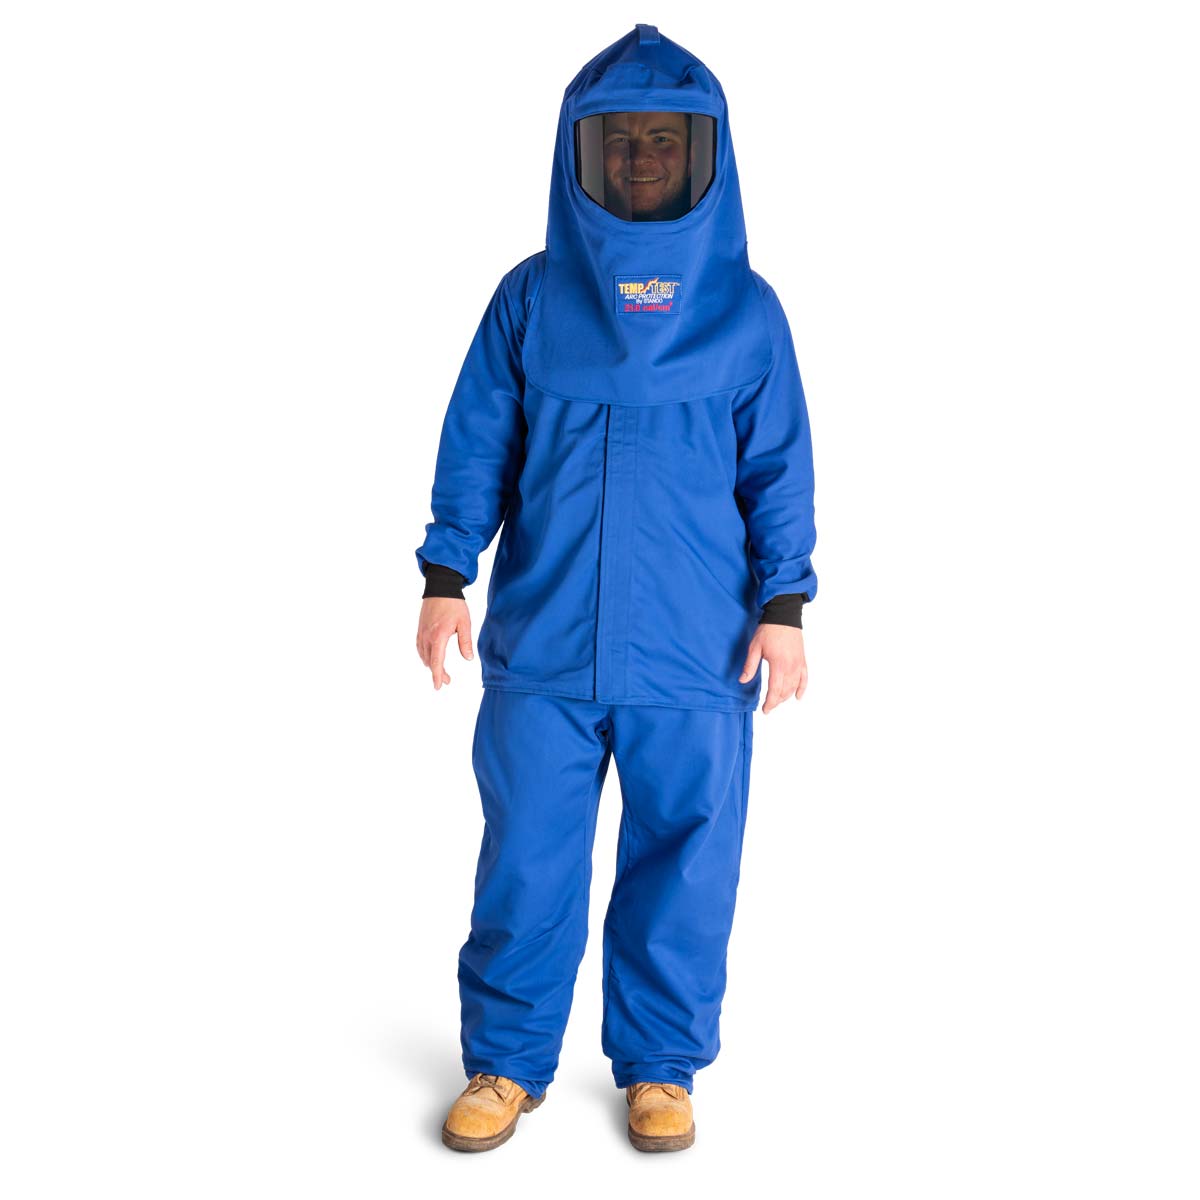 Standard Suit for Arc Flash Protection